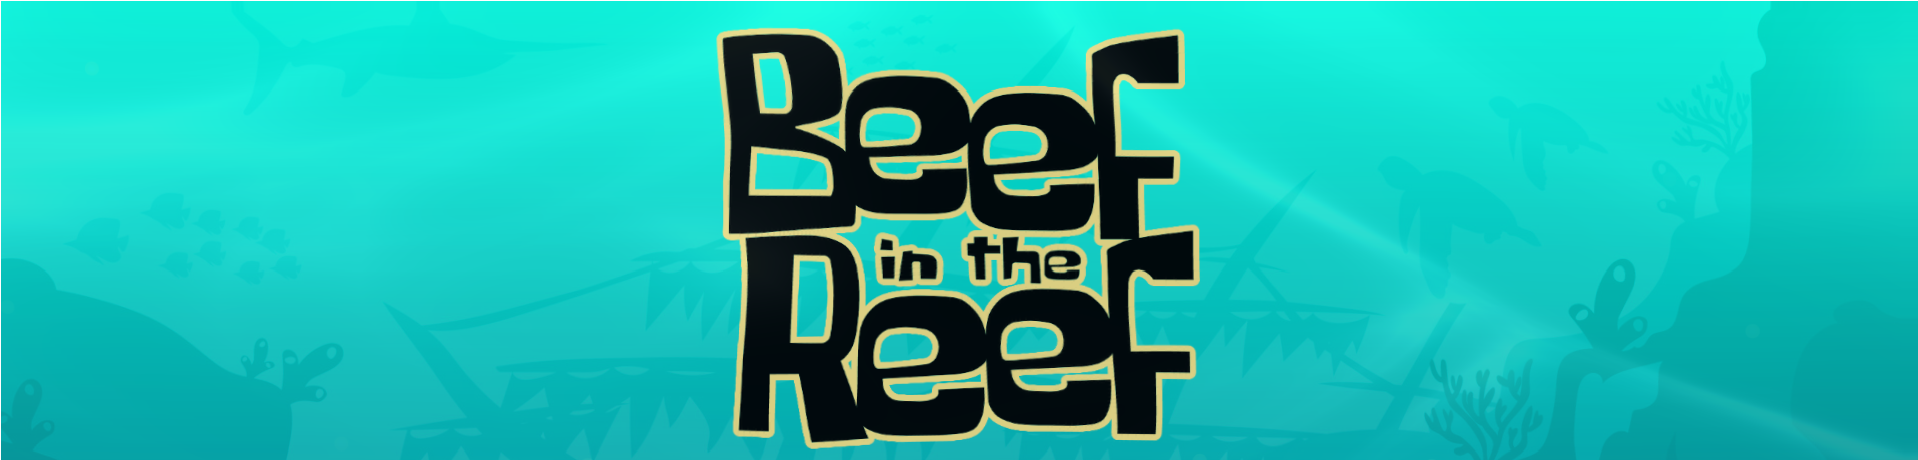 Beef in the Reef